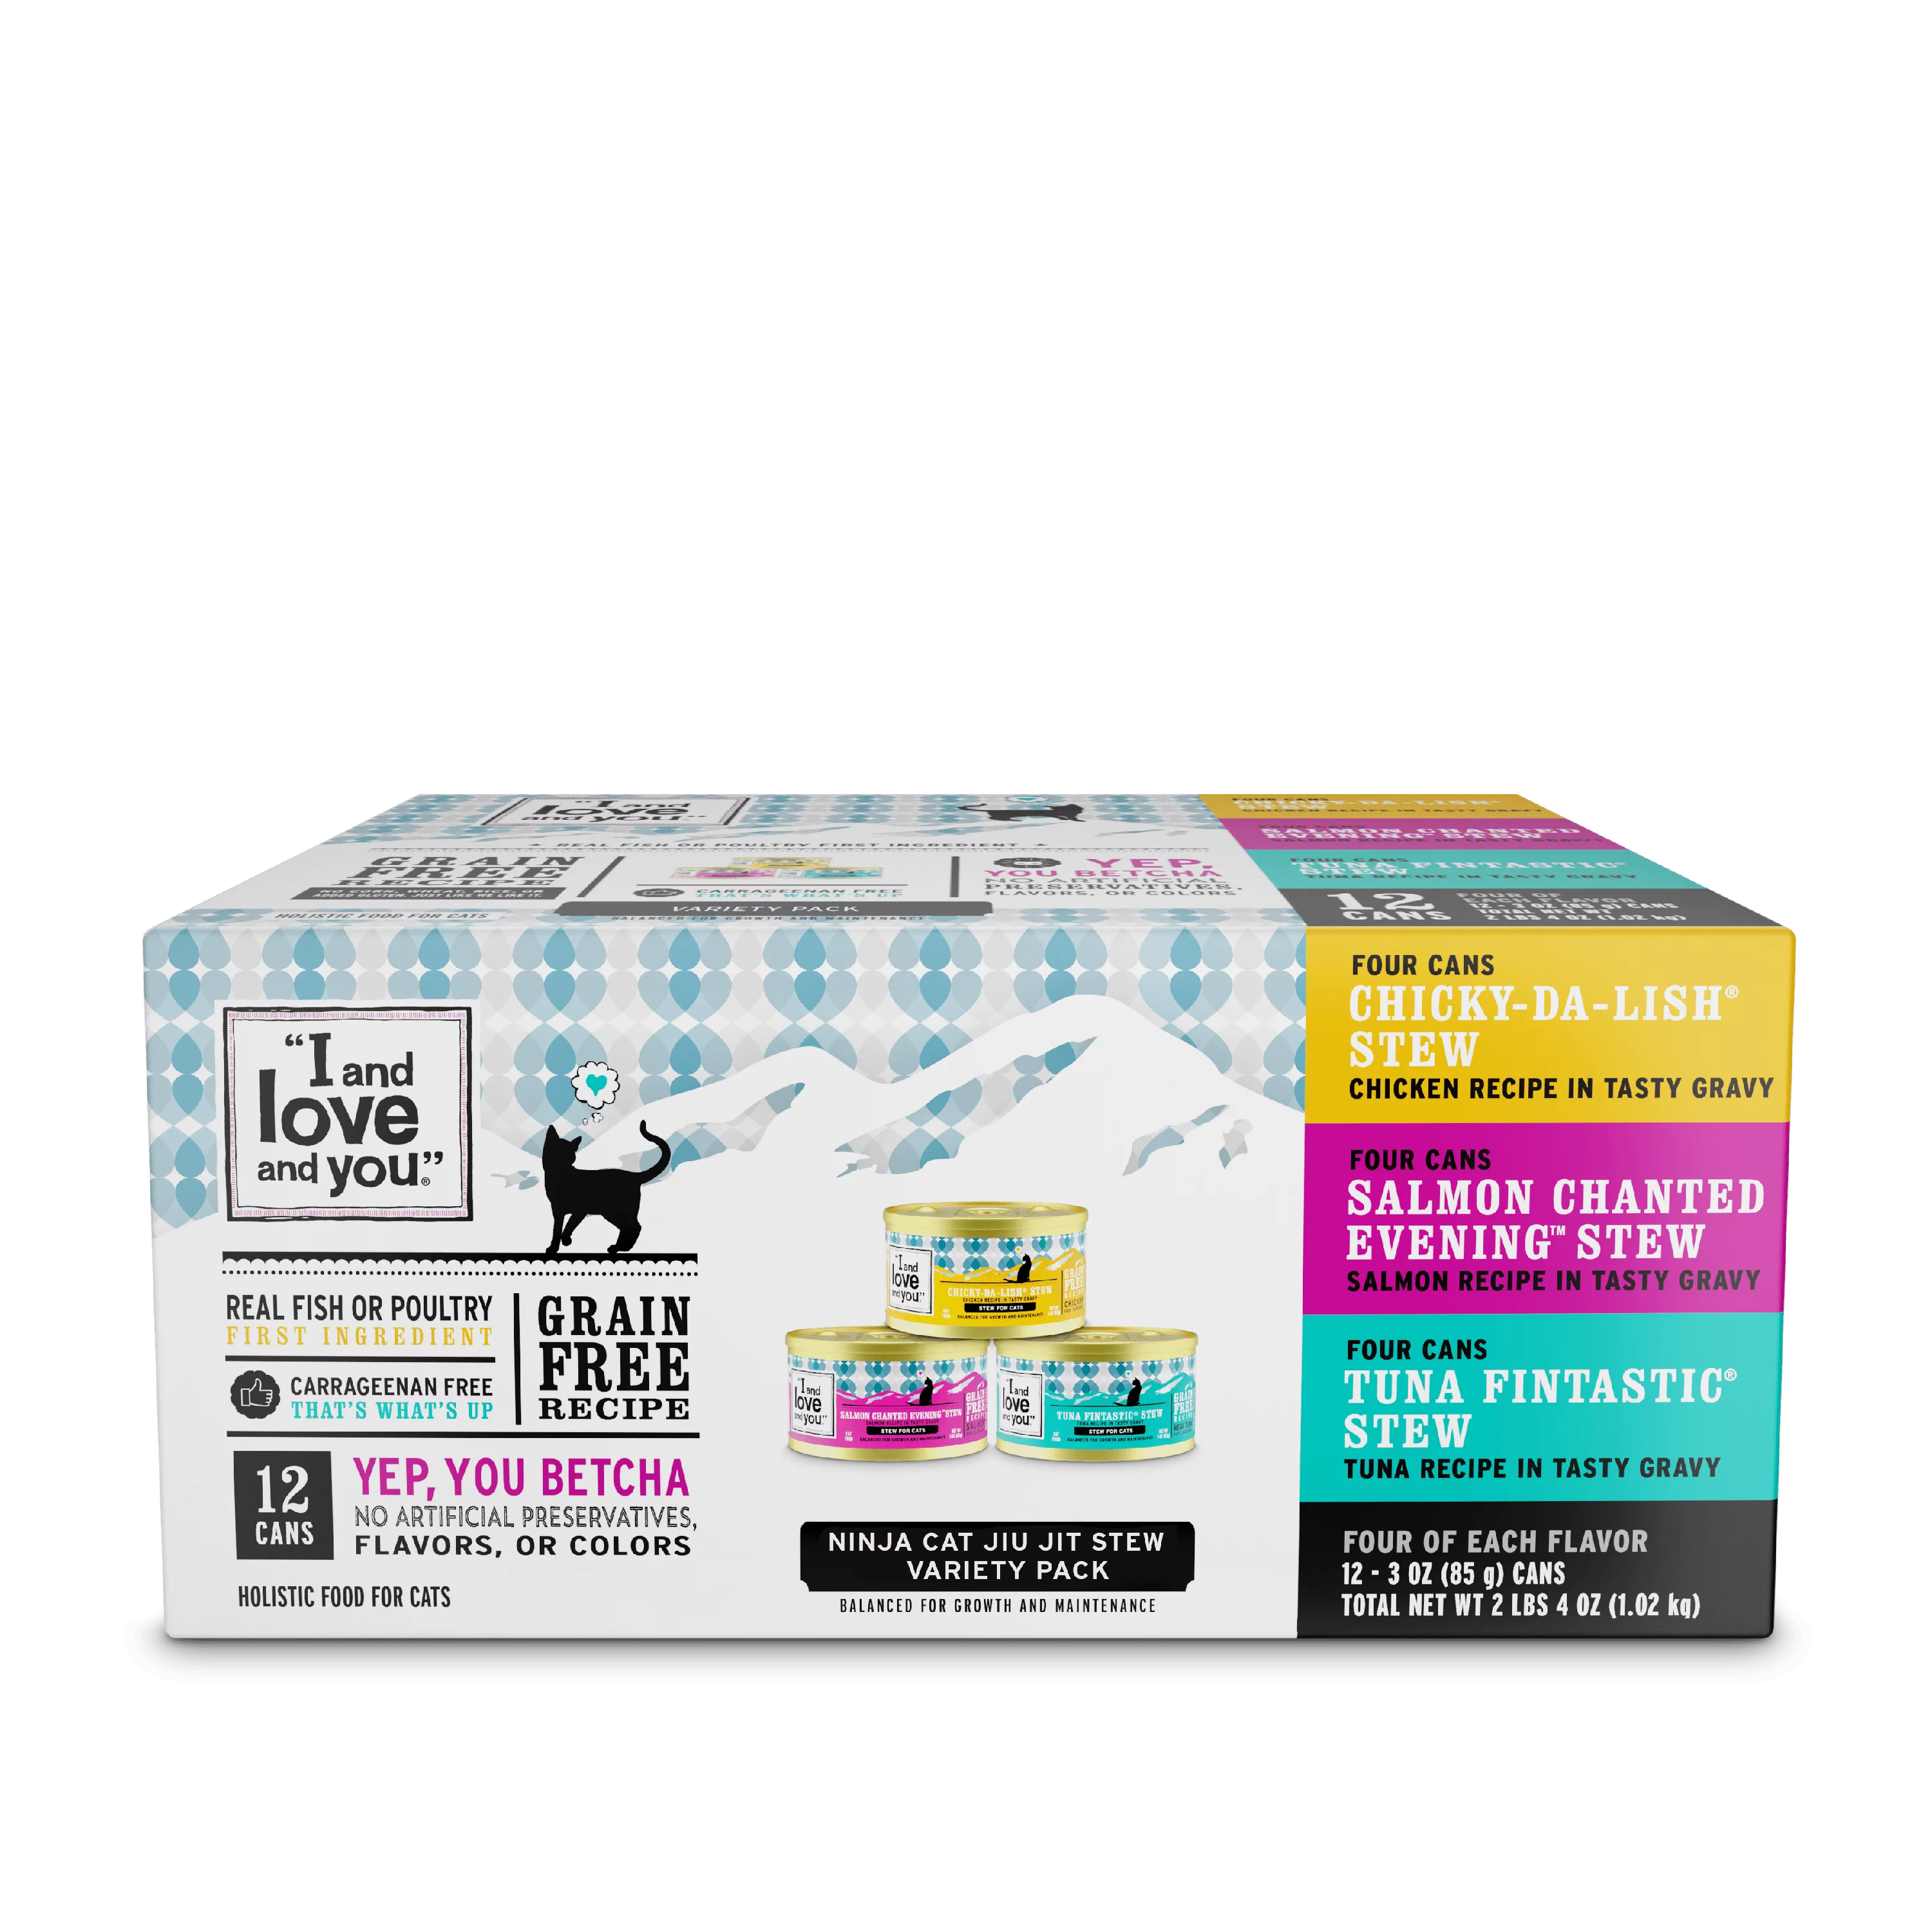 "I and love and you" Grain Free Wet Canned Cat Food Variety Pack; Chicky-Da-Lish, Salmon Chanted Evening, Tuna Fintastic